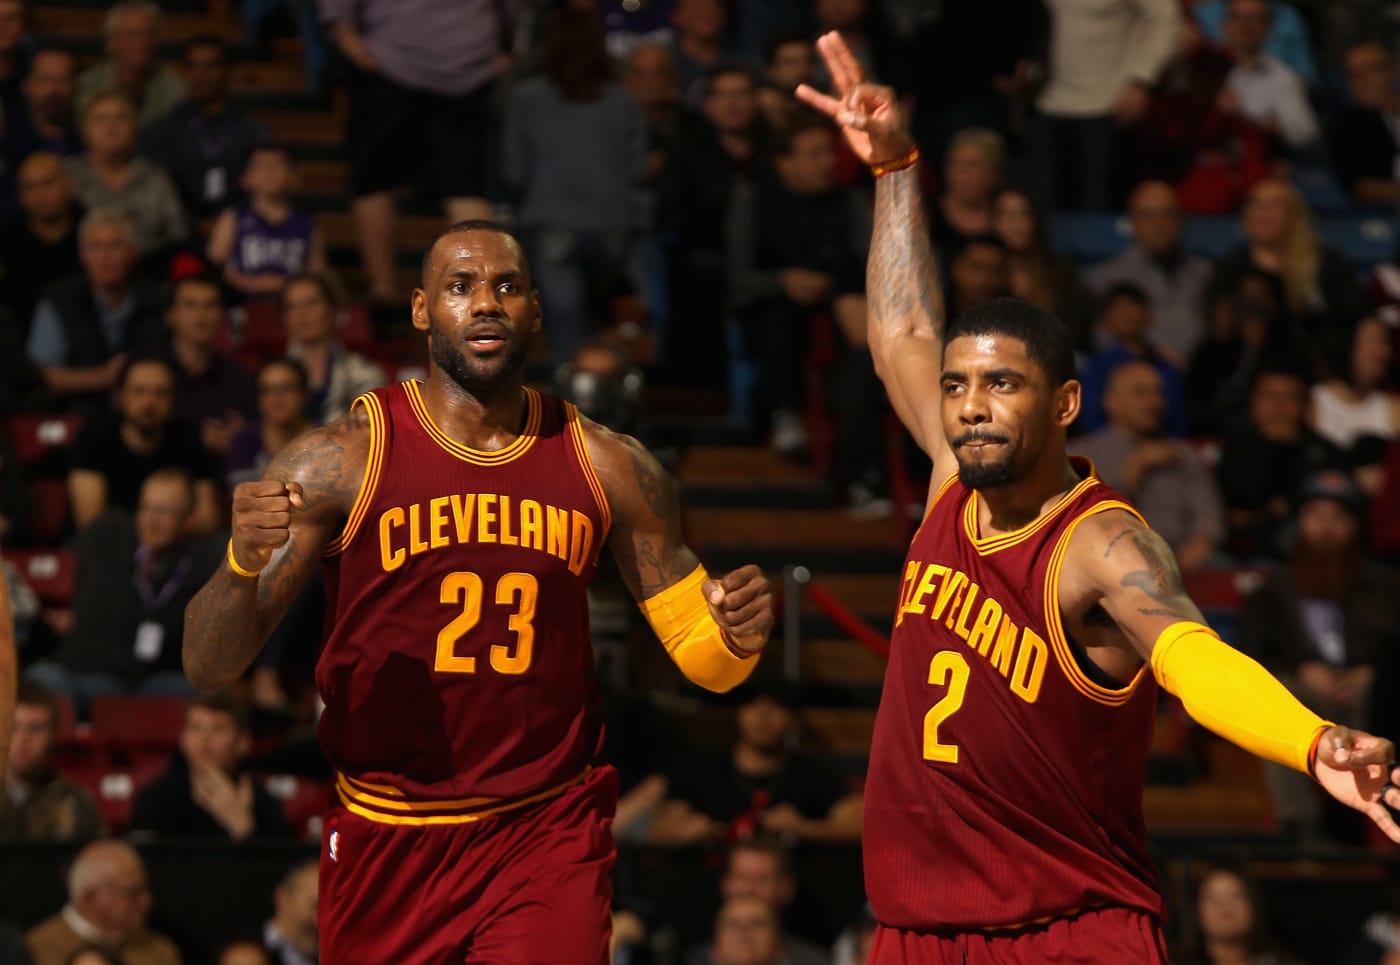 LeBron James and Kyrie Irving celebrate a big play.